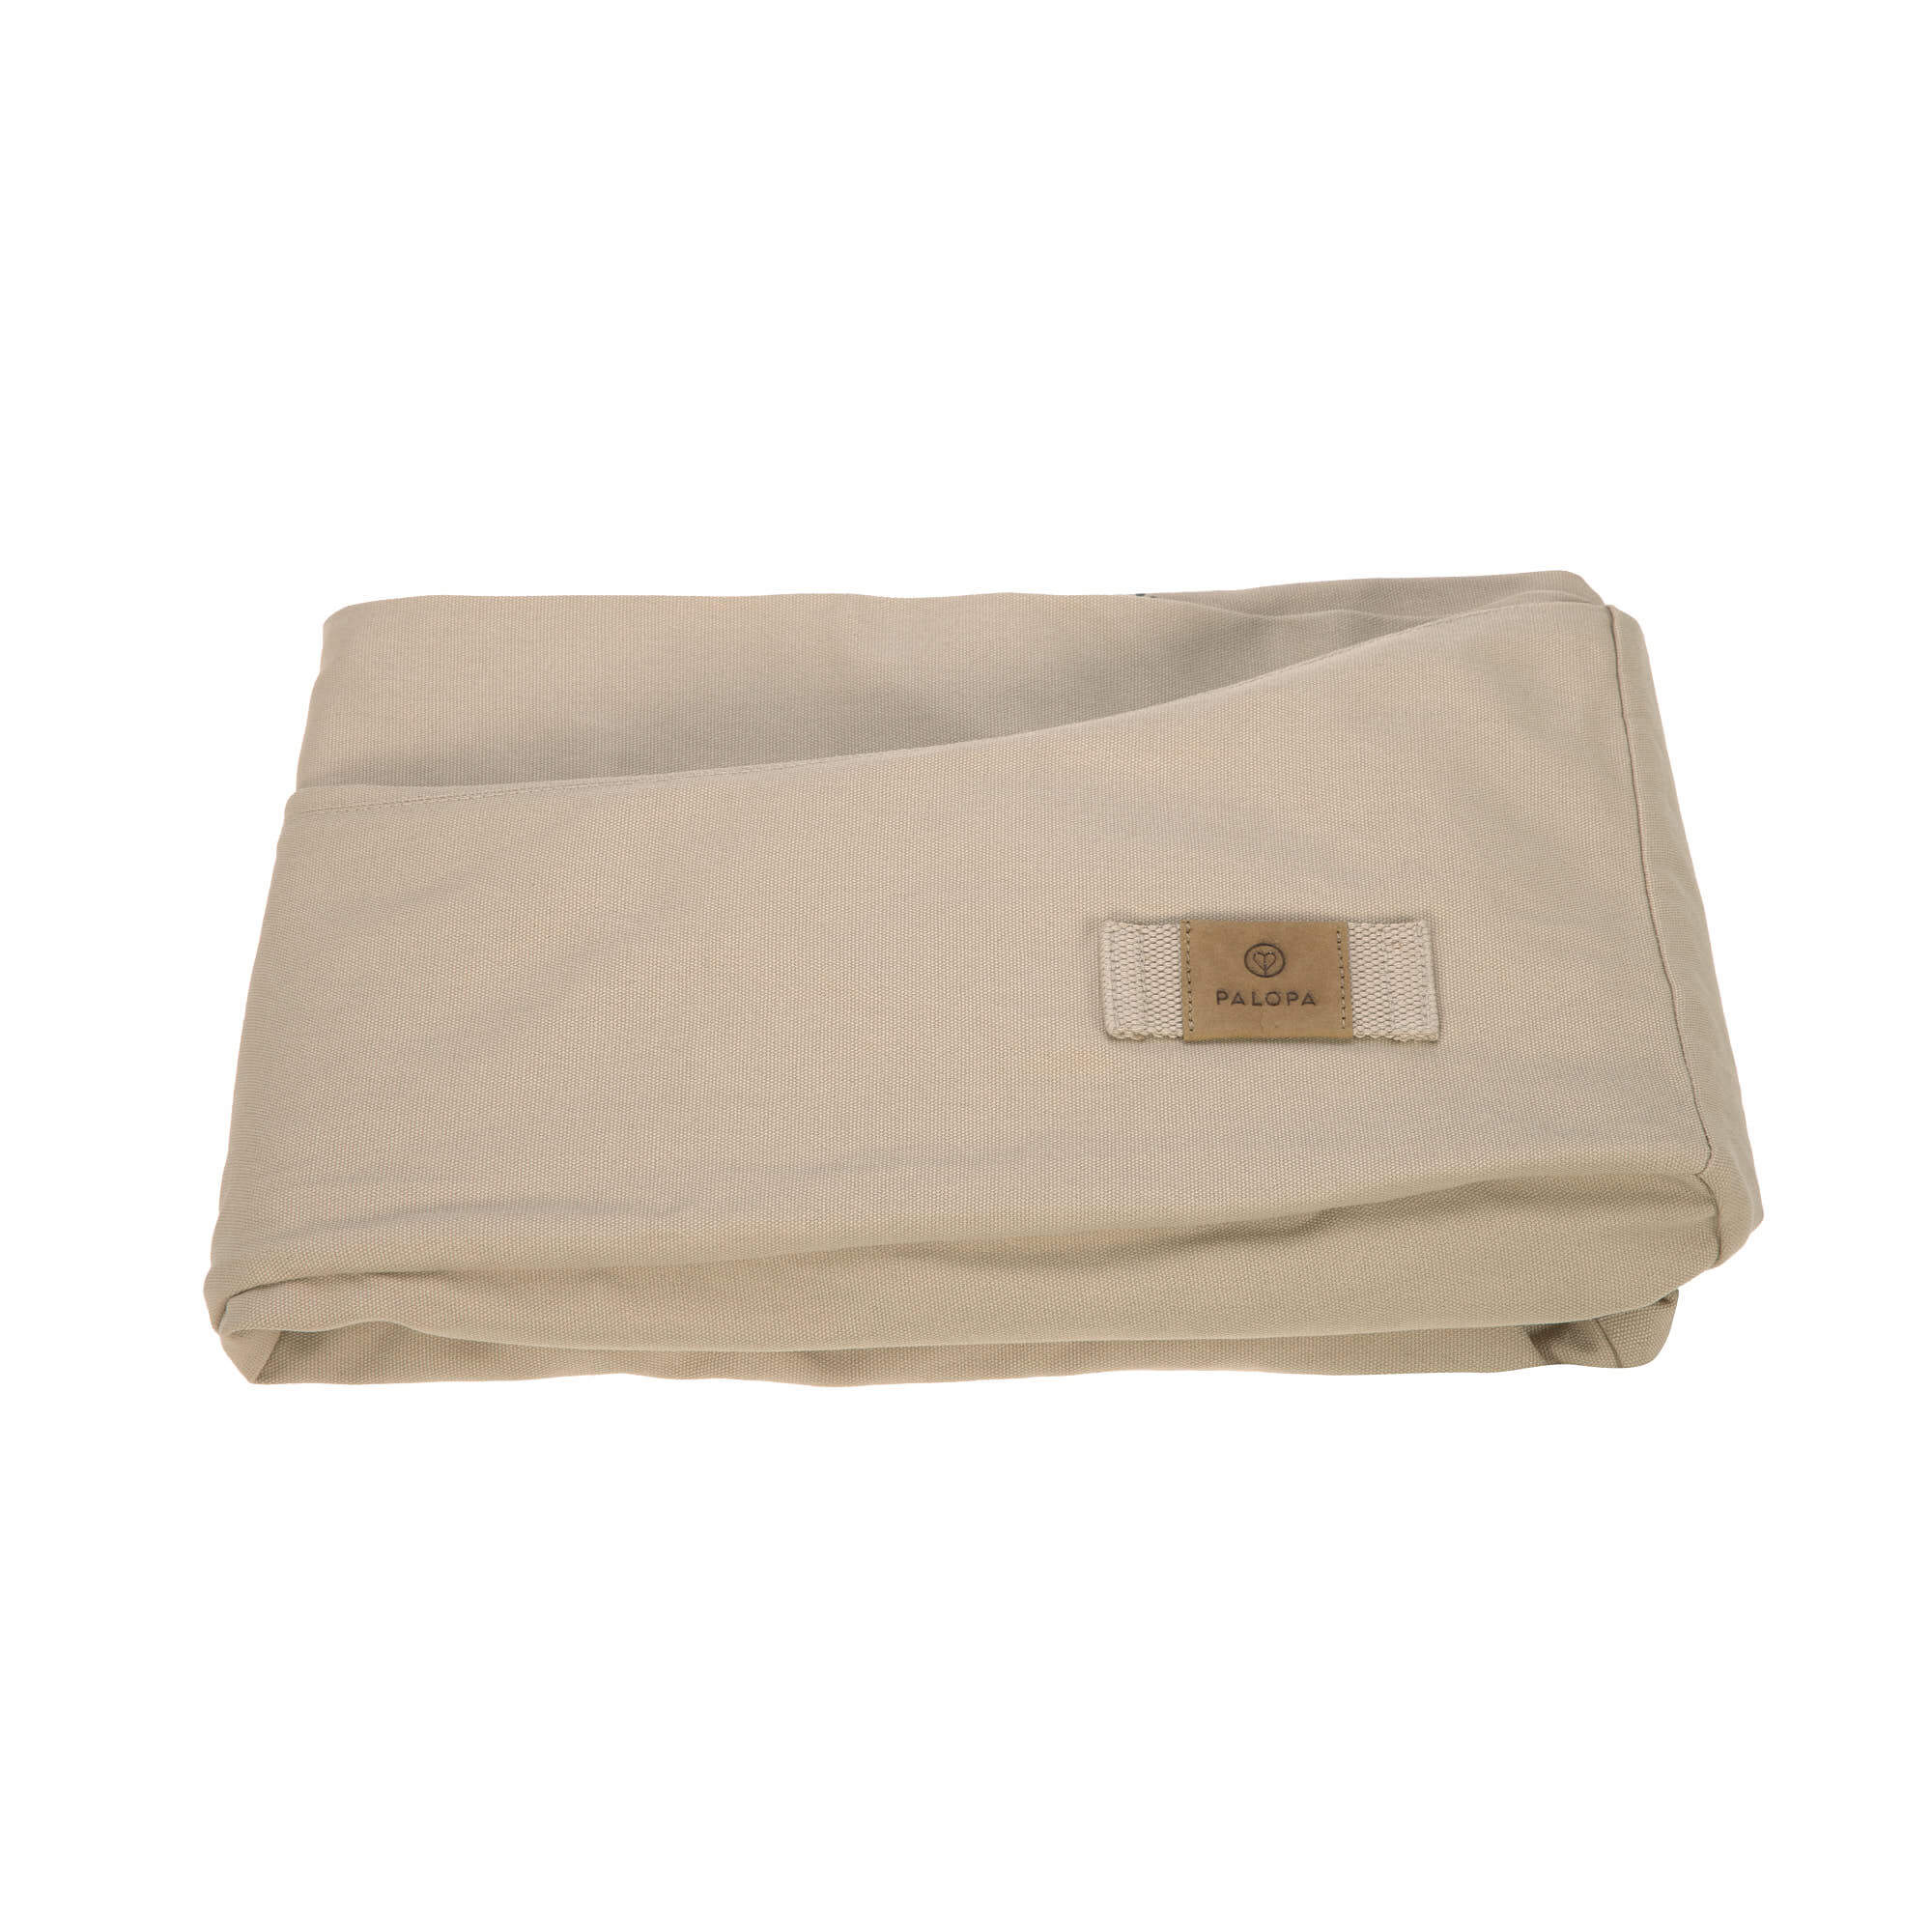 Dog bed cover - Fred, Humus